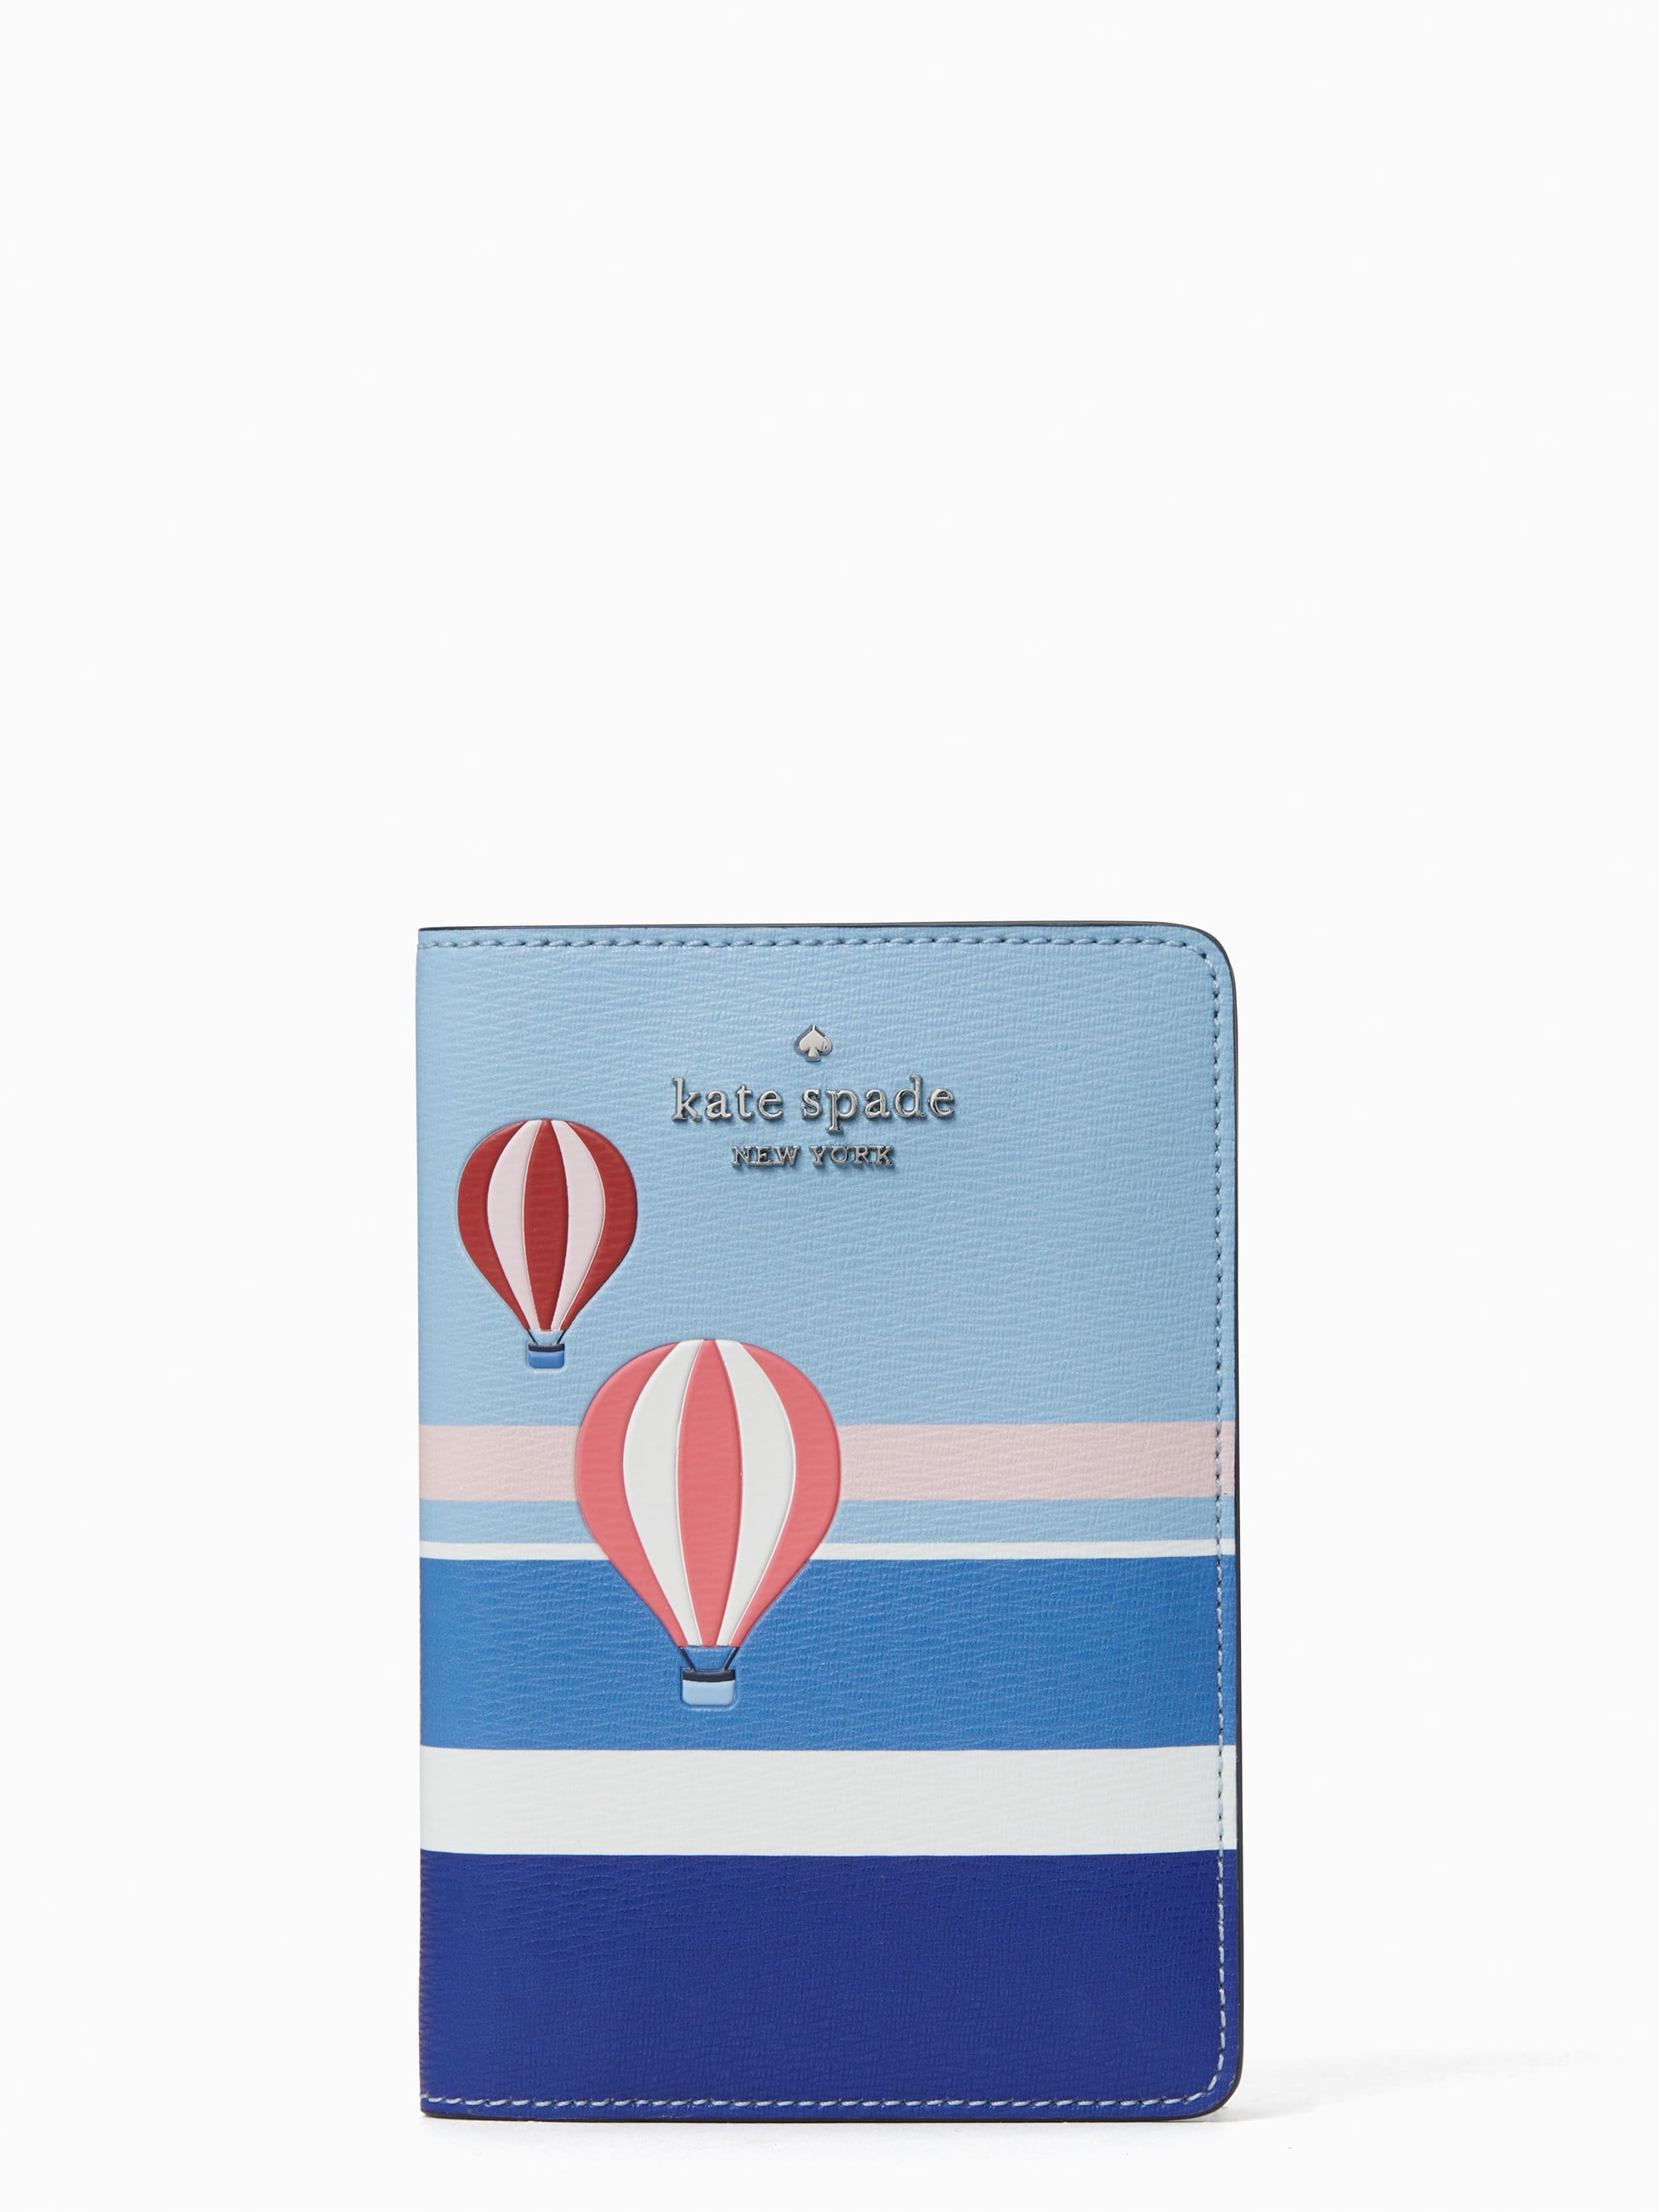 A New Passport Holder: Kate Spade Hot Air Balloon Passport Holder | Shhh! Kate  Spade Is Having a Secret Sale With Discounts You Have to See to Believe |  POPSUGAR Fashion Photo 9